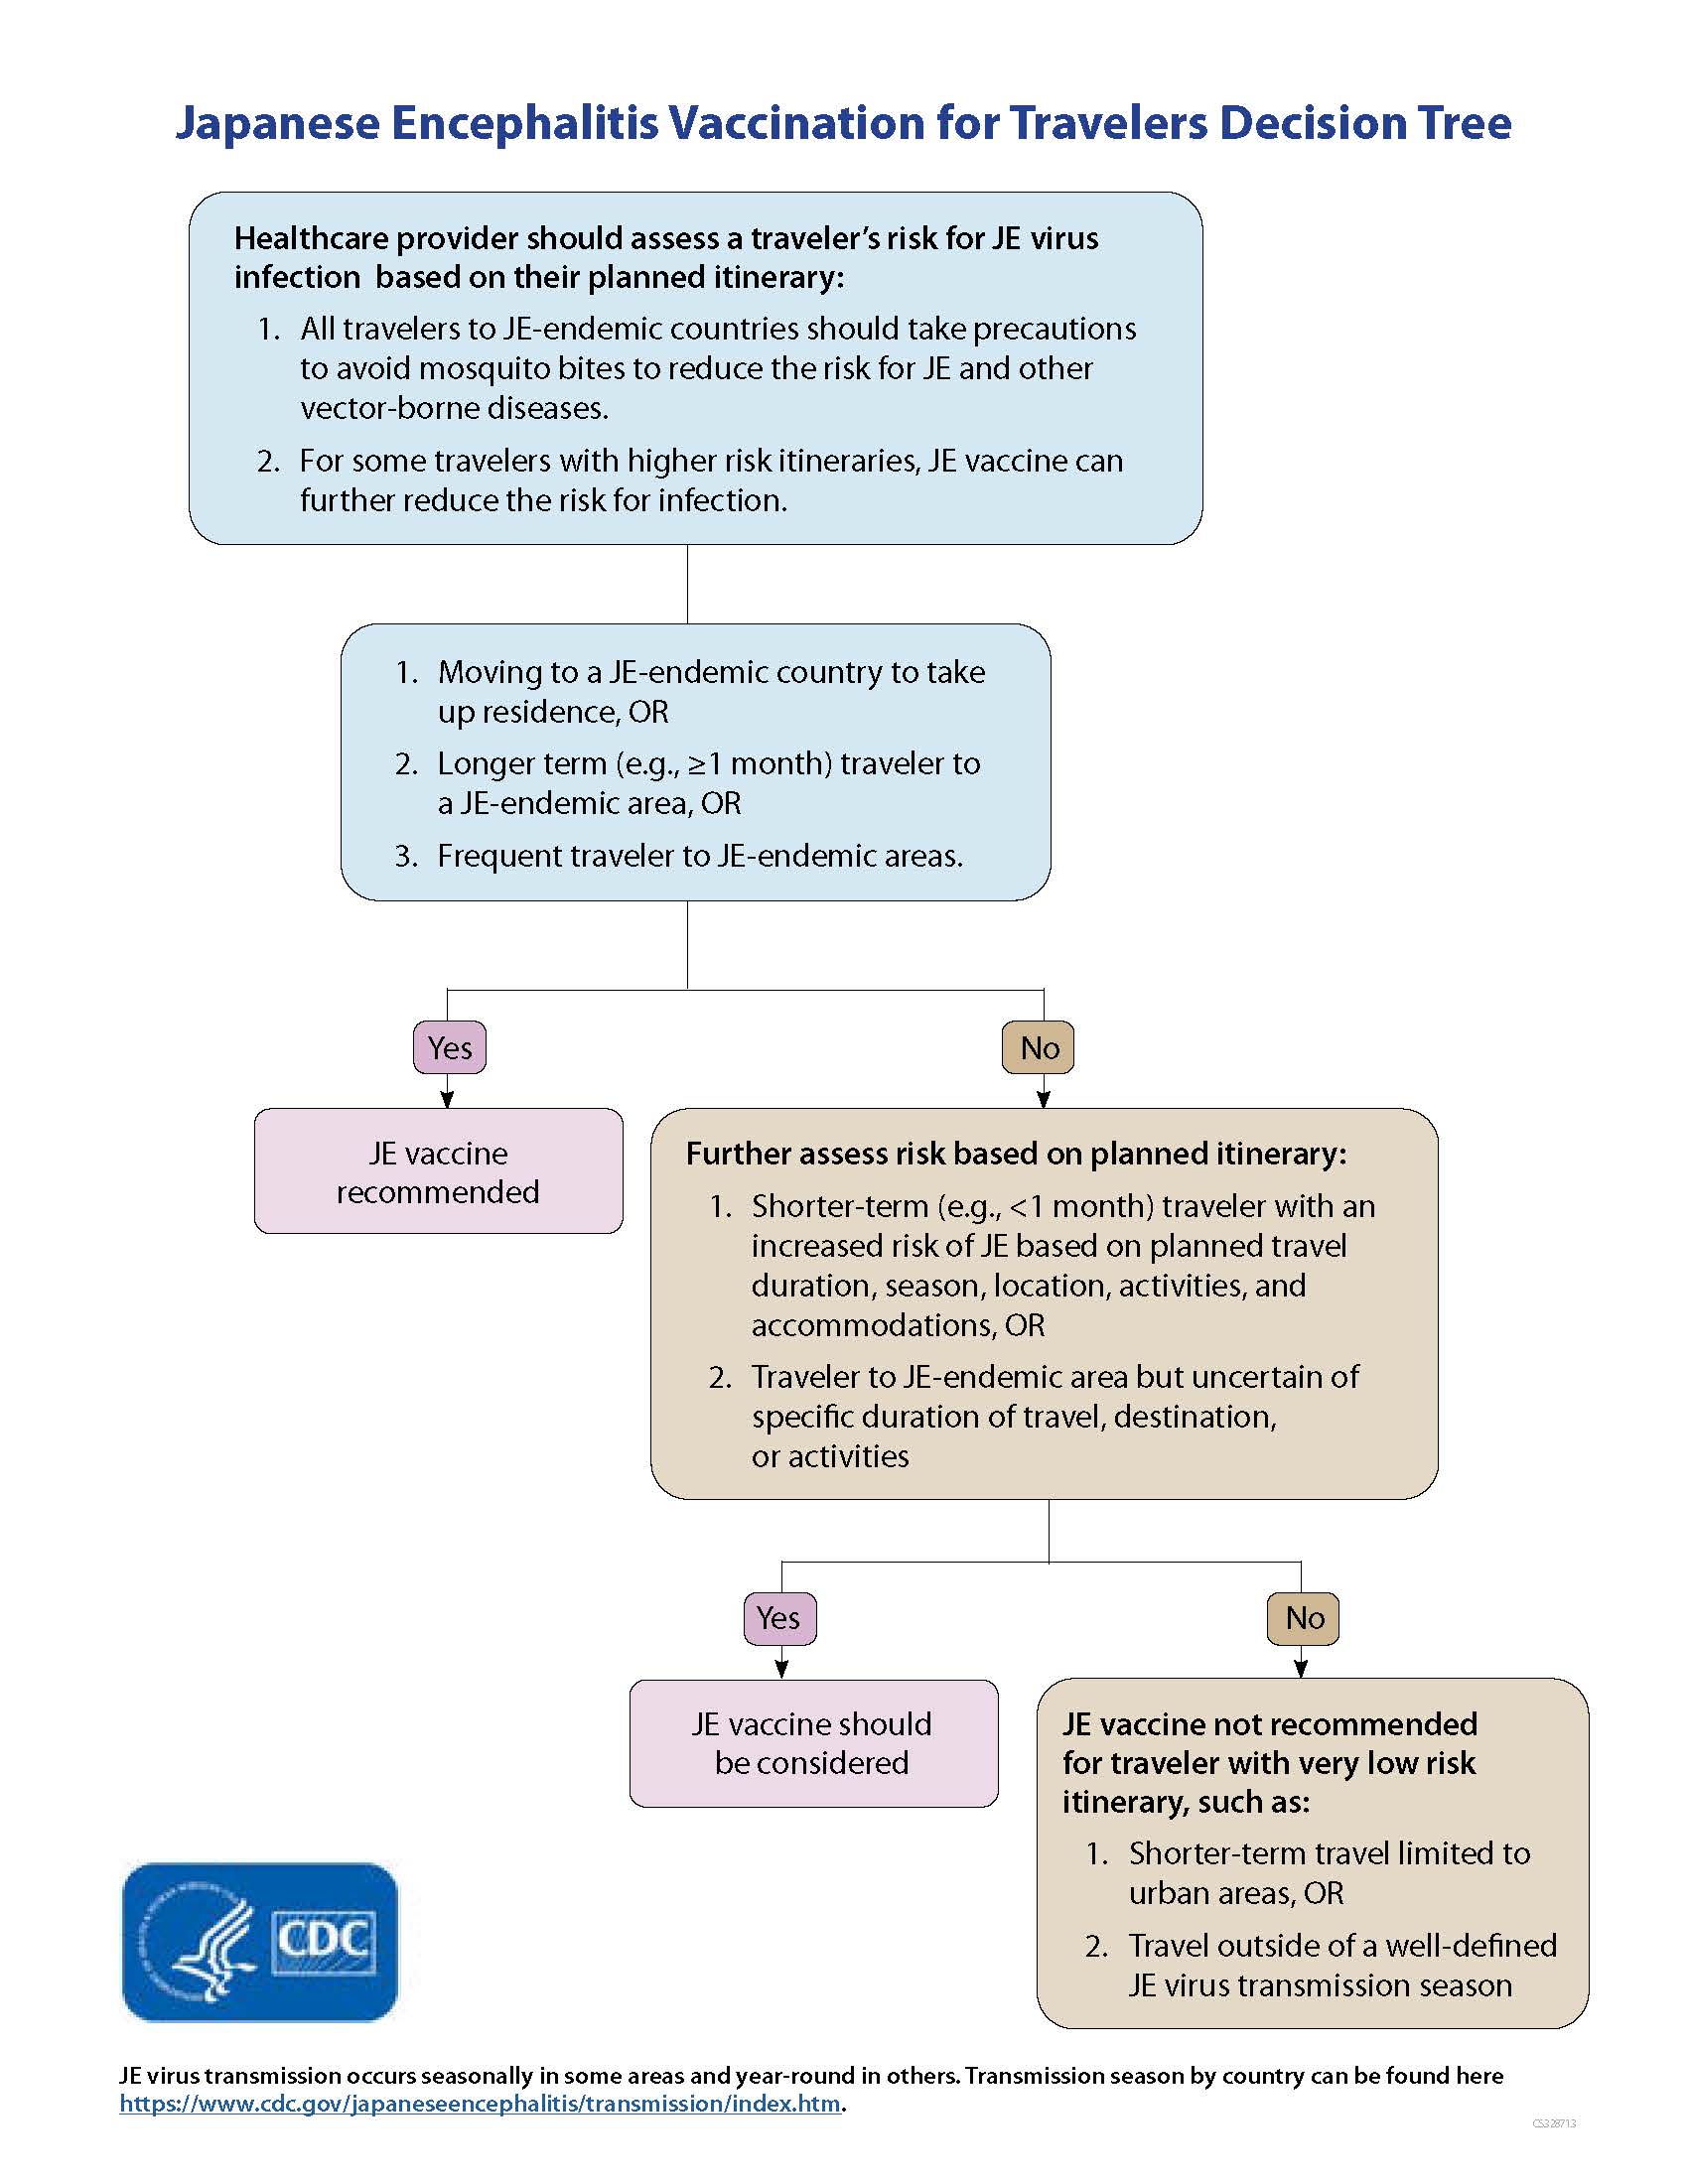 Decision tree to determine if Japanese encephalitis vaccine is recommended for certain travelers.